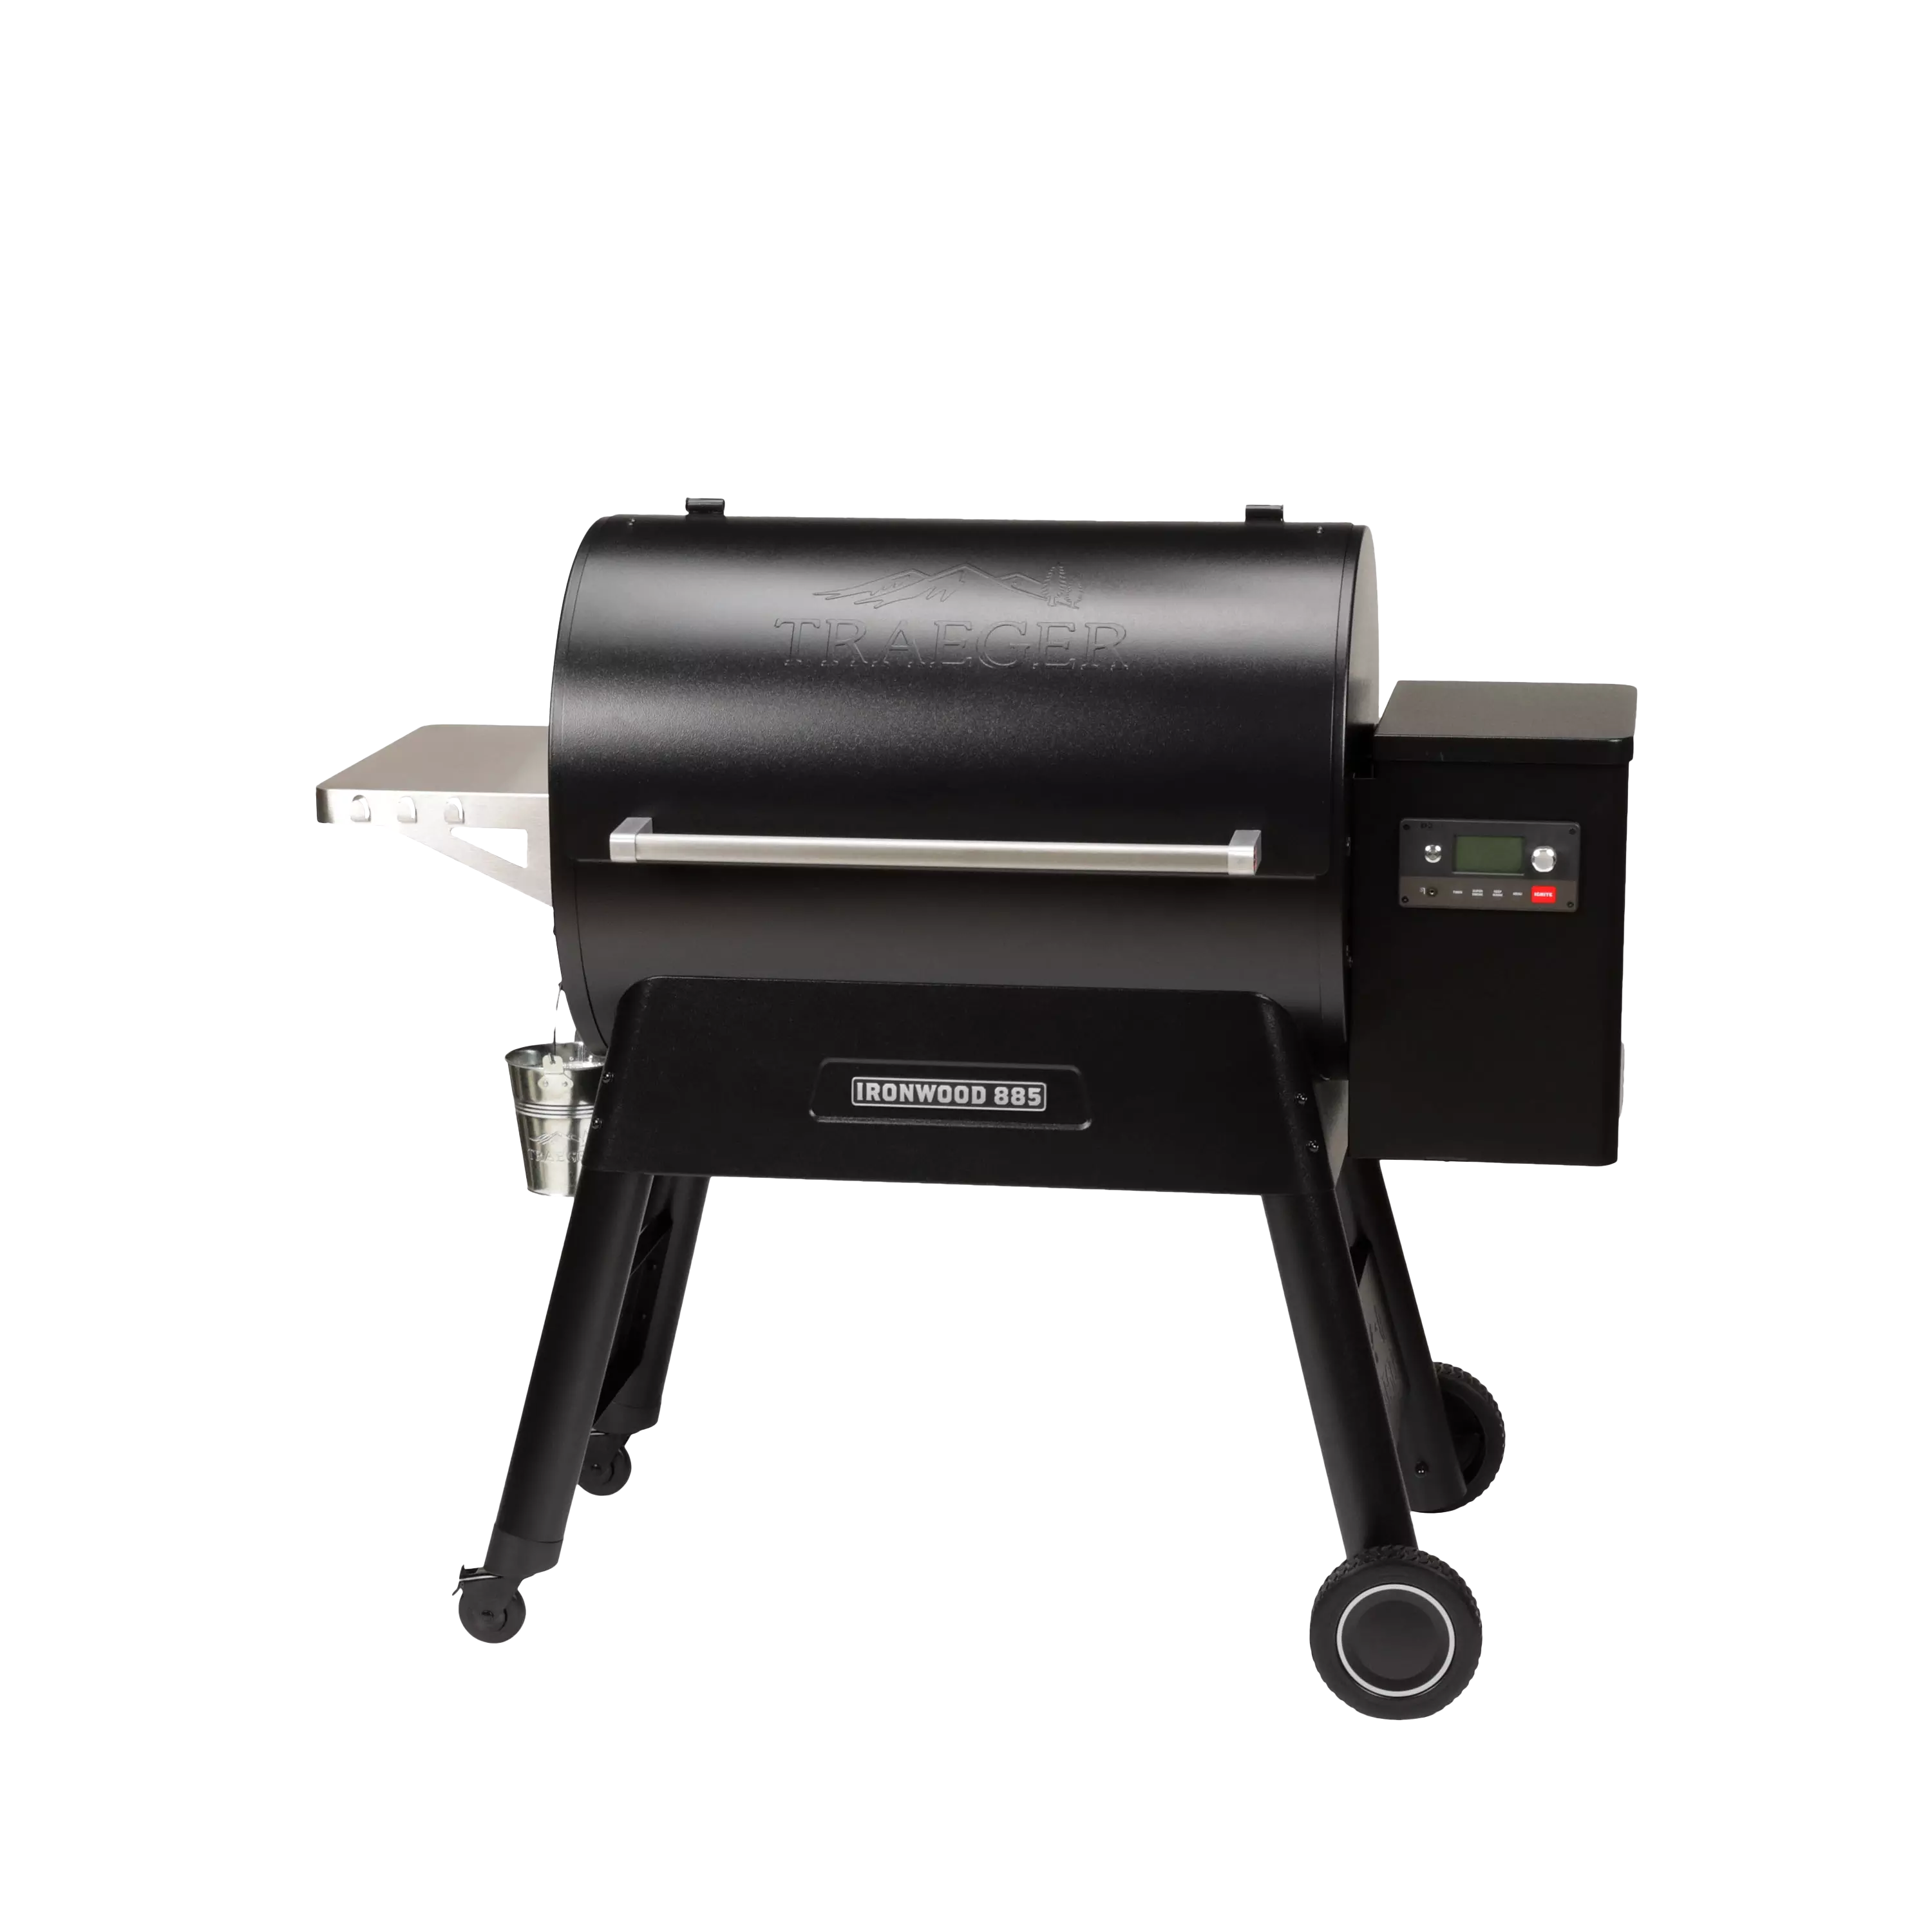 Traeger Gift Set For The Pellet Smoker Grill Enthusiast!